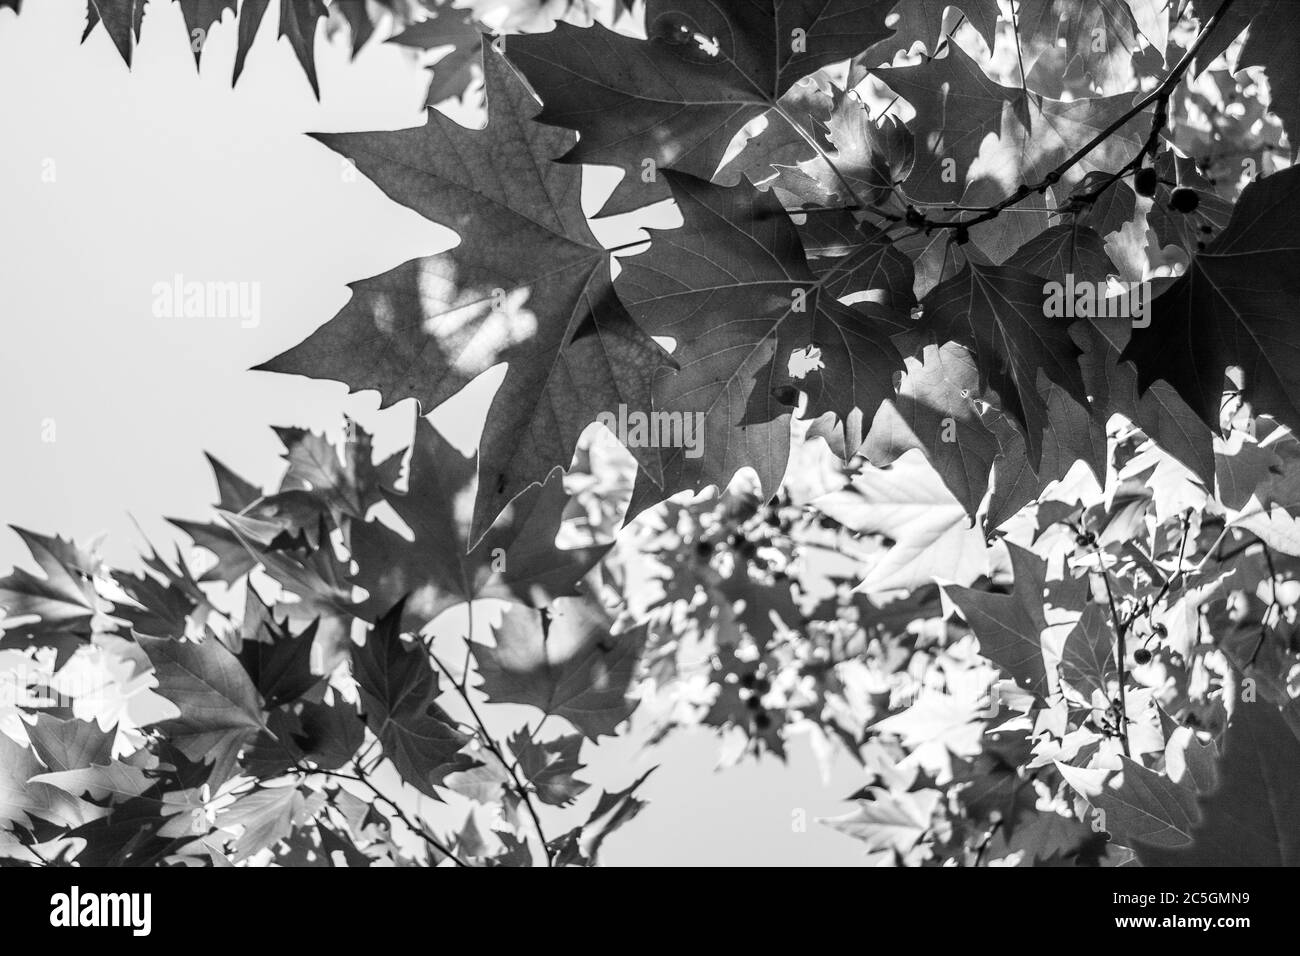 An image of leaves from a tree shot from ground level. Stock Photo